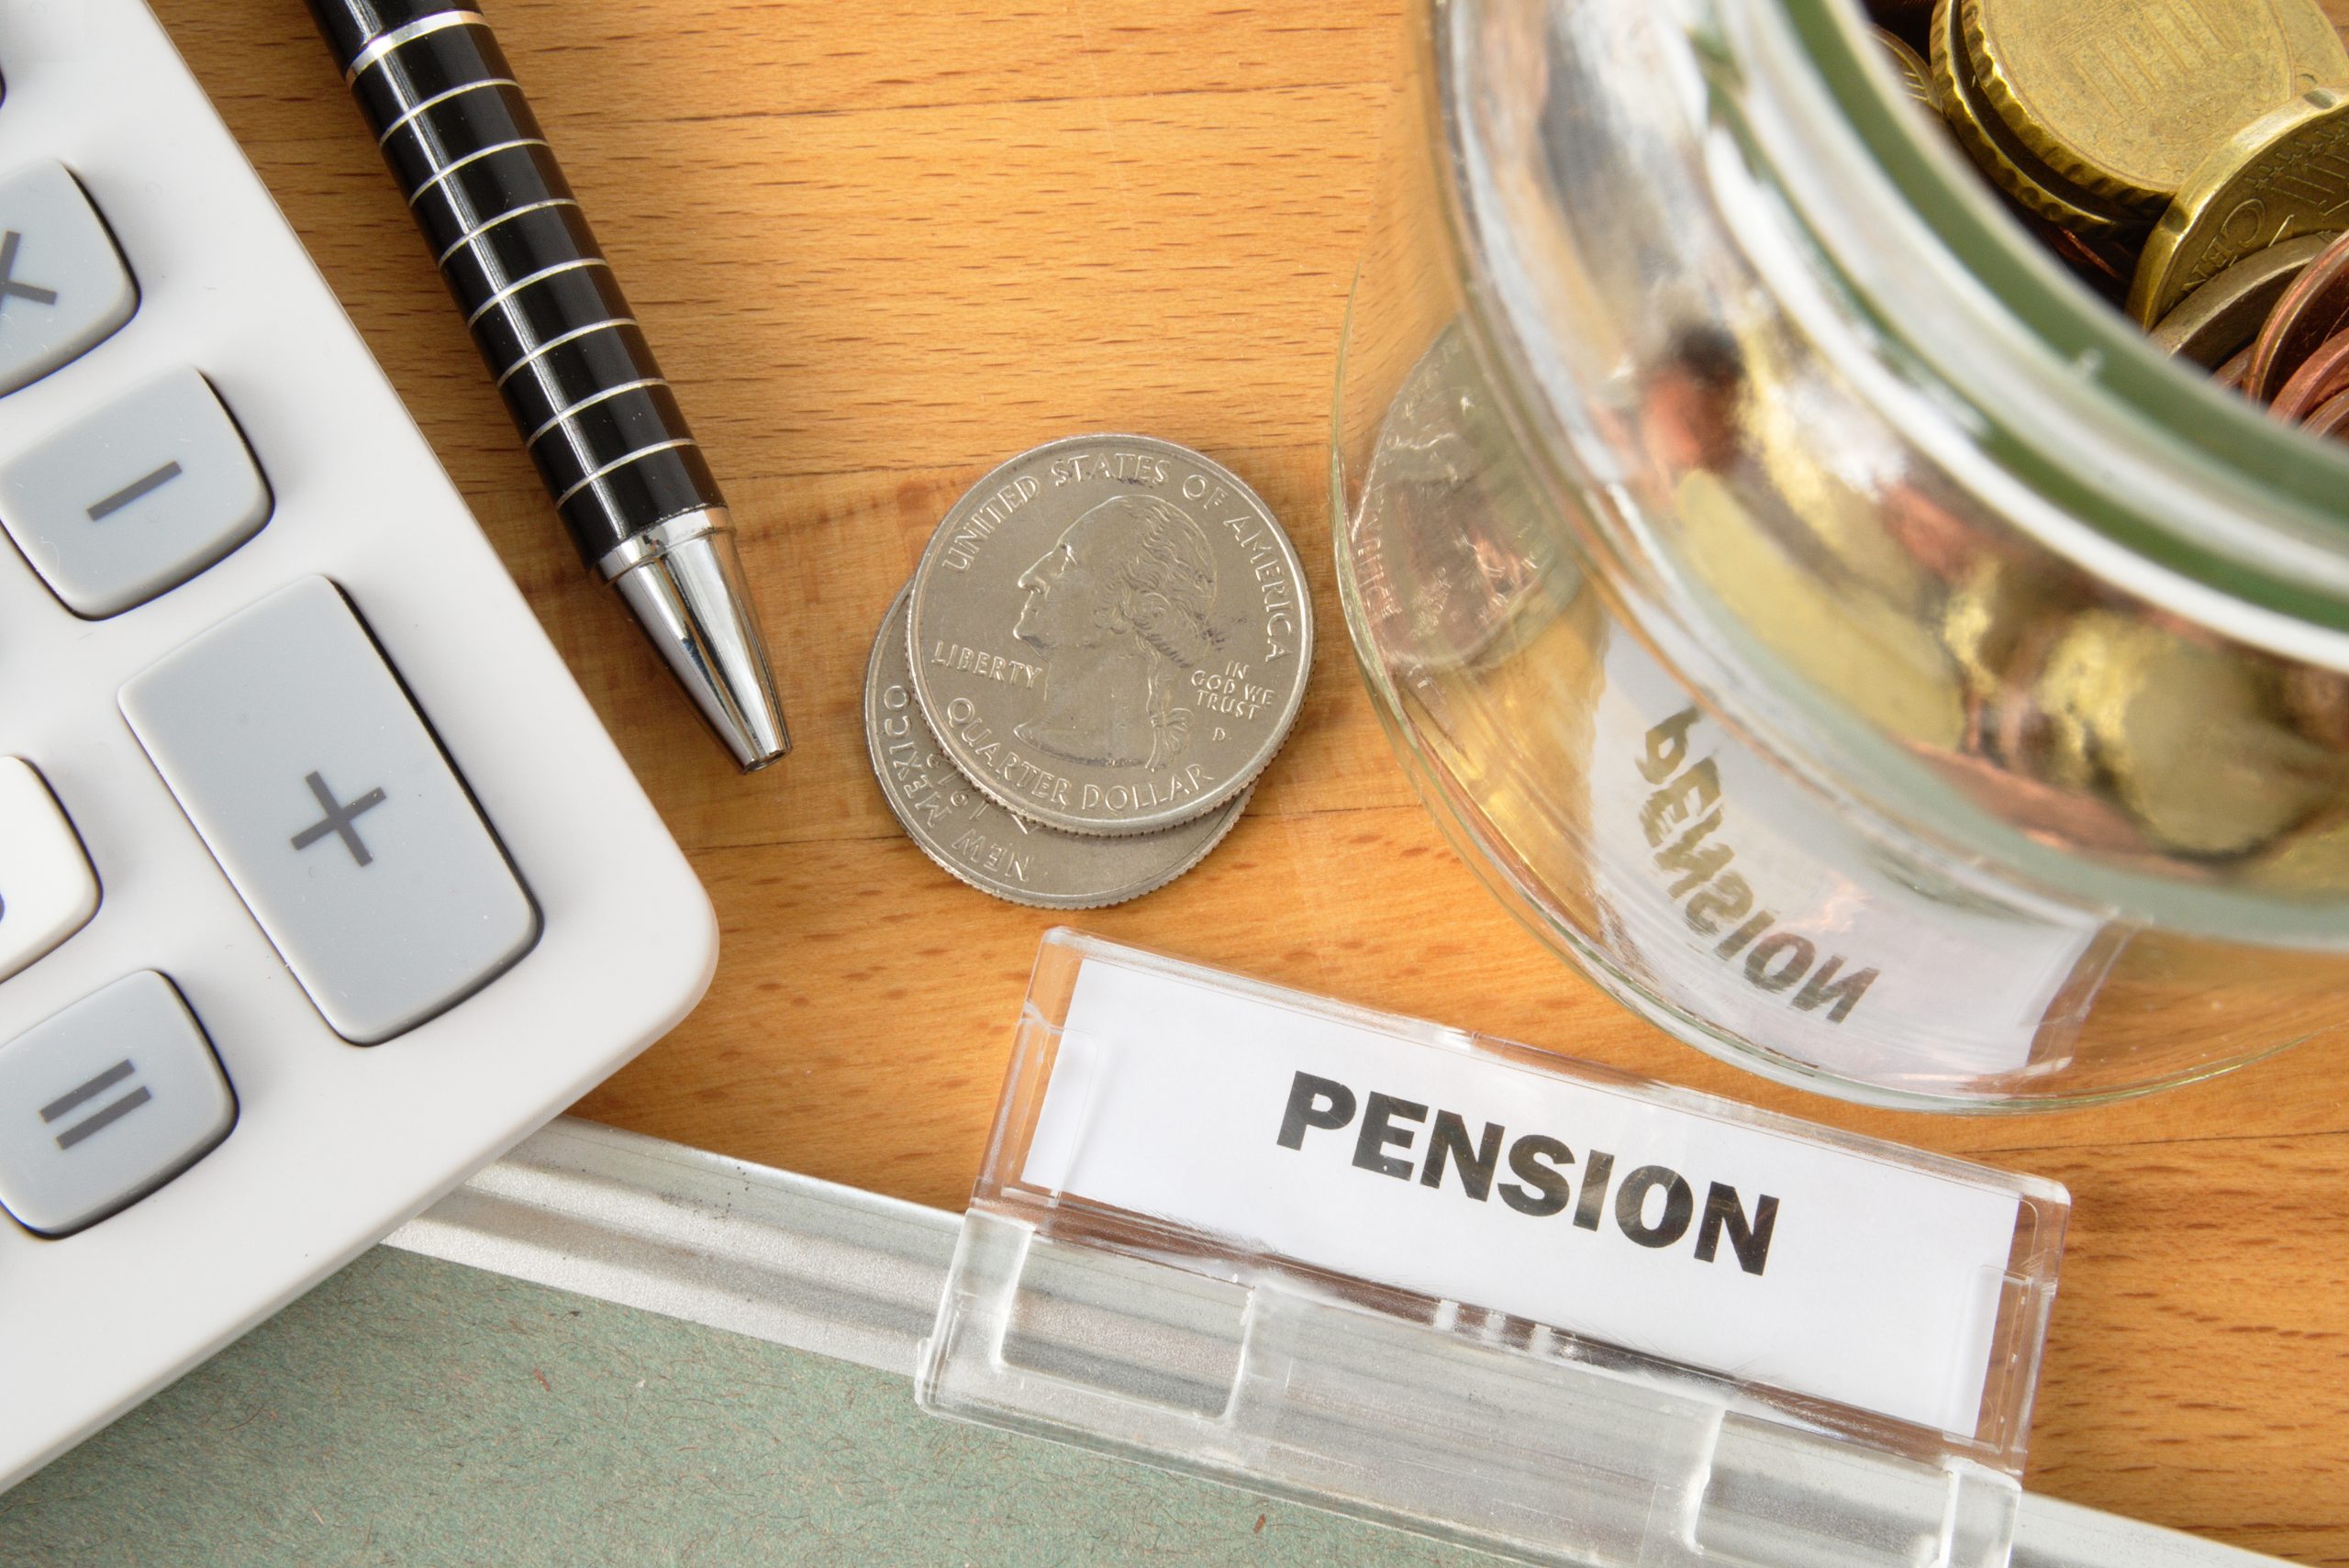 Are staff pension contributions affecting your margins? Here’s what you can do